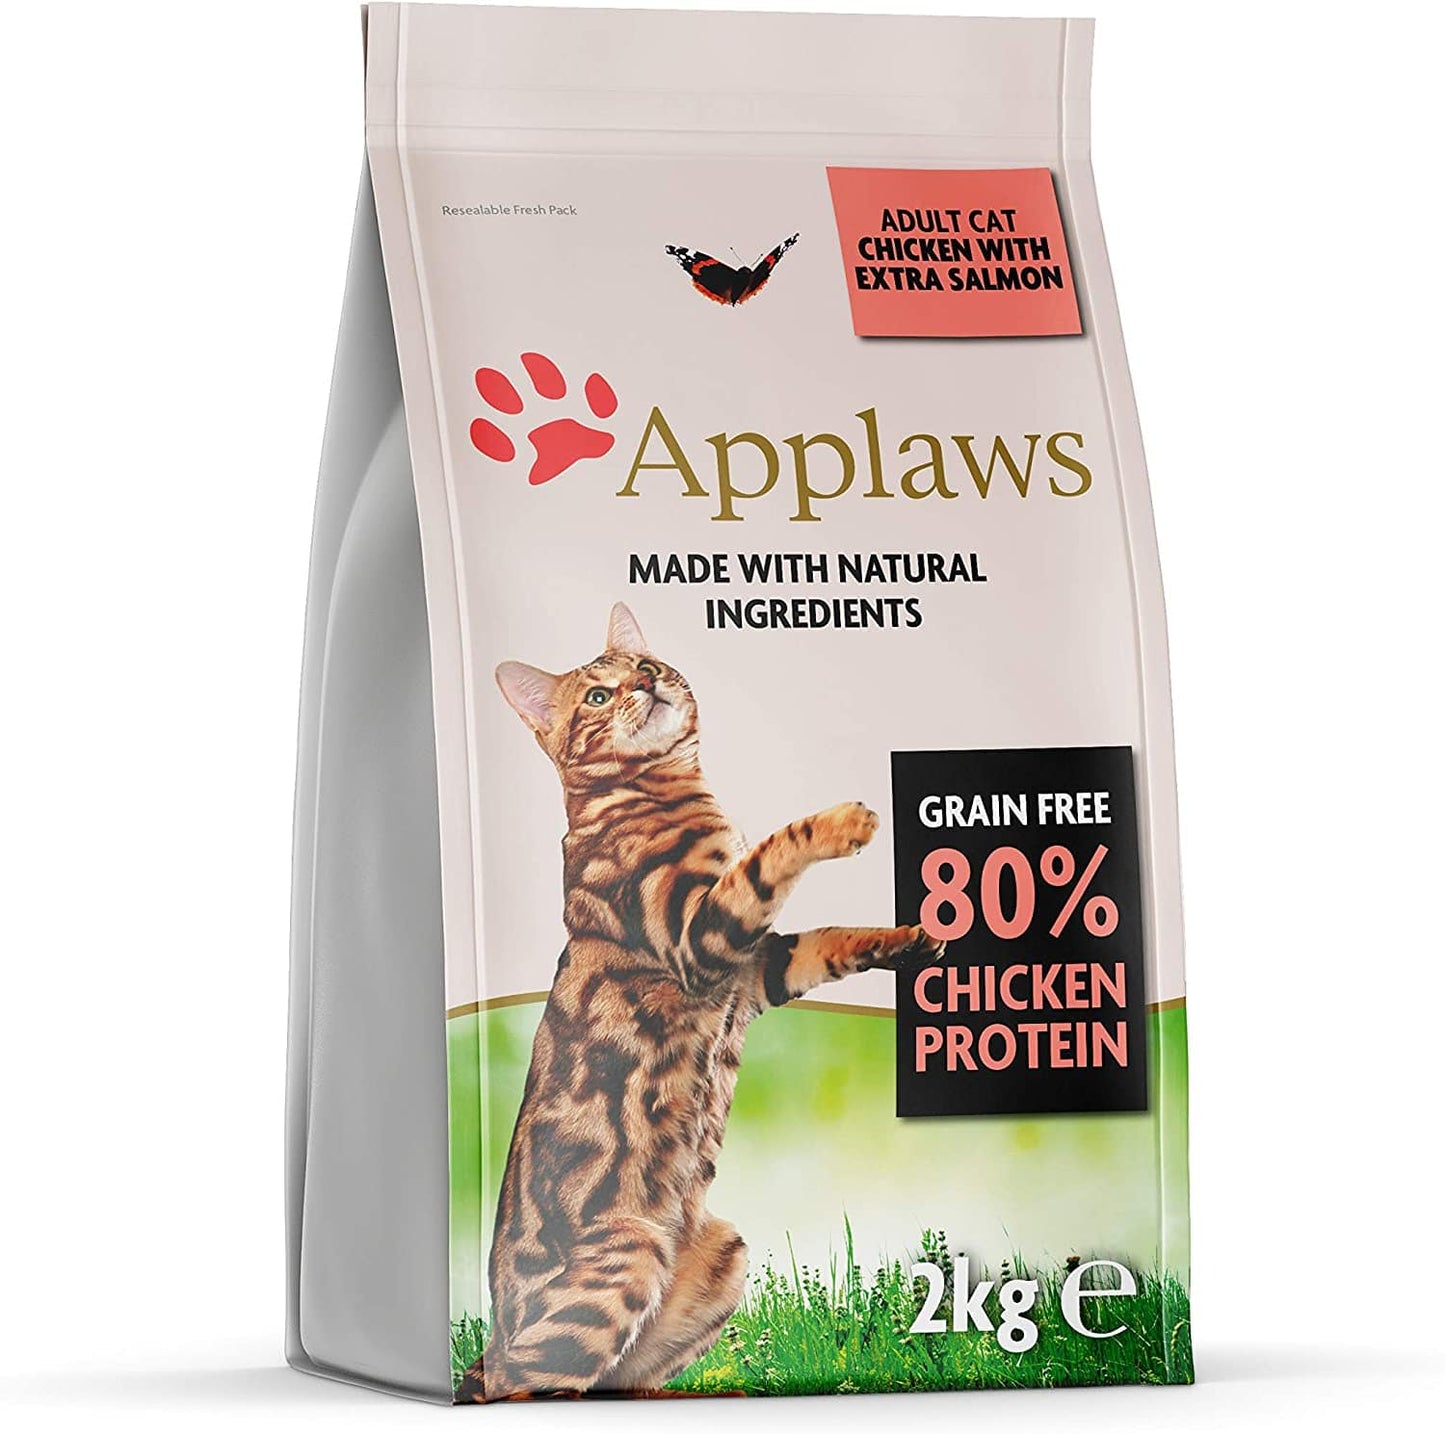 Applaws Complete and Grain Free Dry Adult Cat Food, Chicken with Salmon